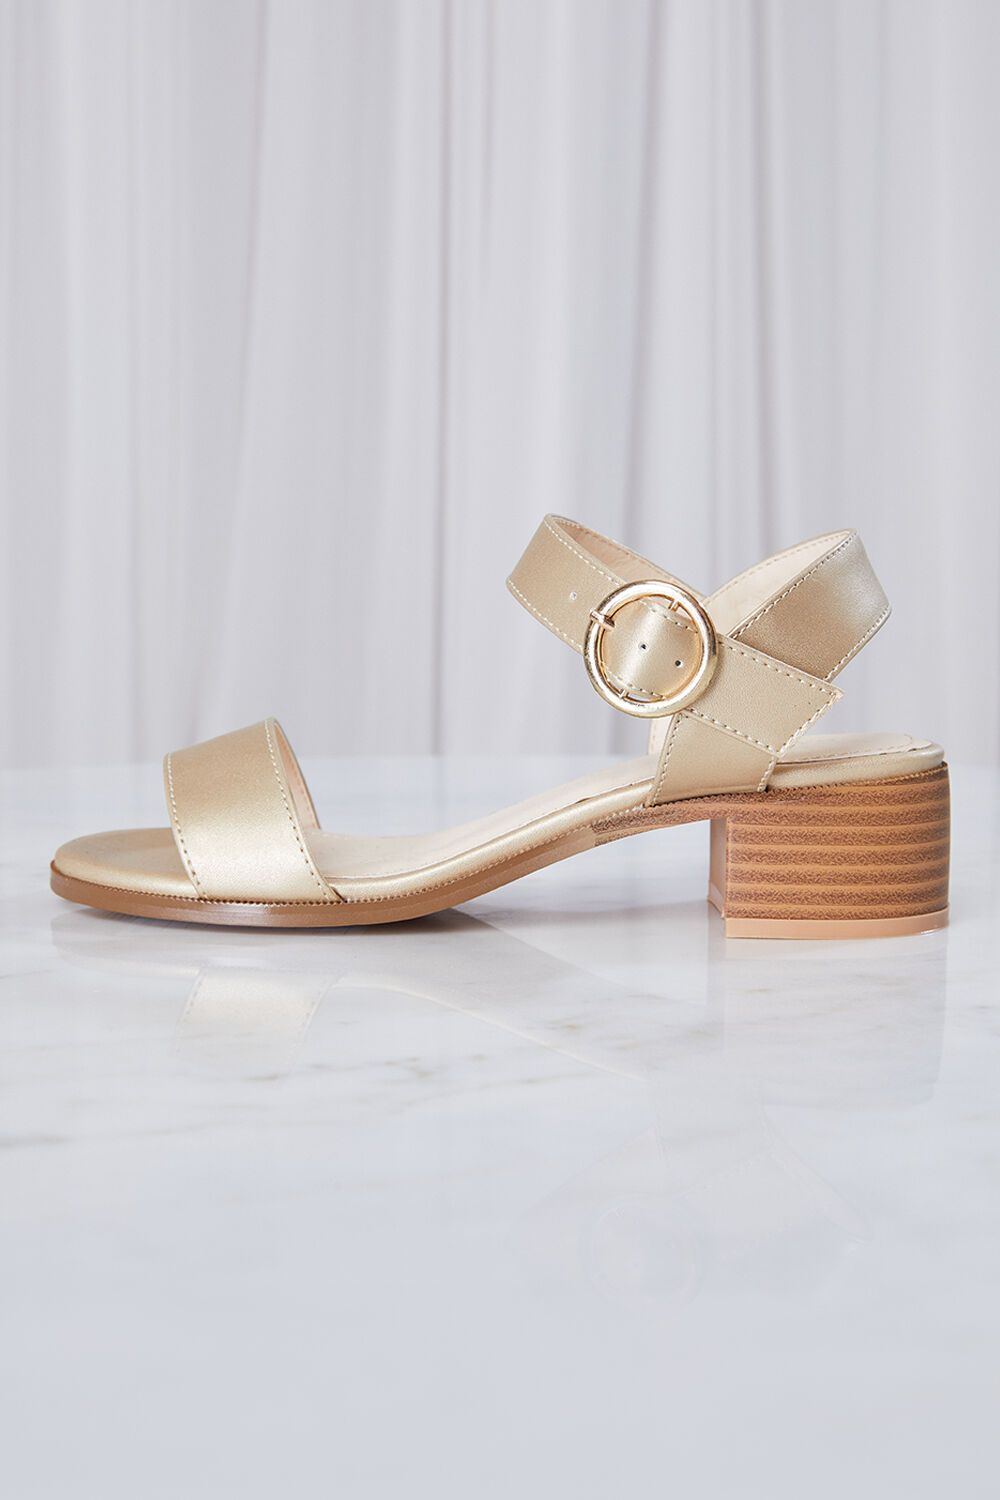 BUCKLE HEEL in colour GOLD EARTH